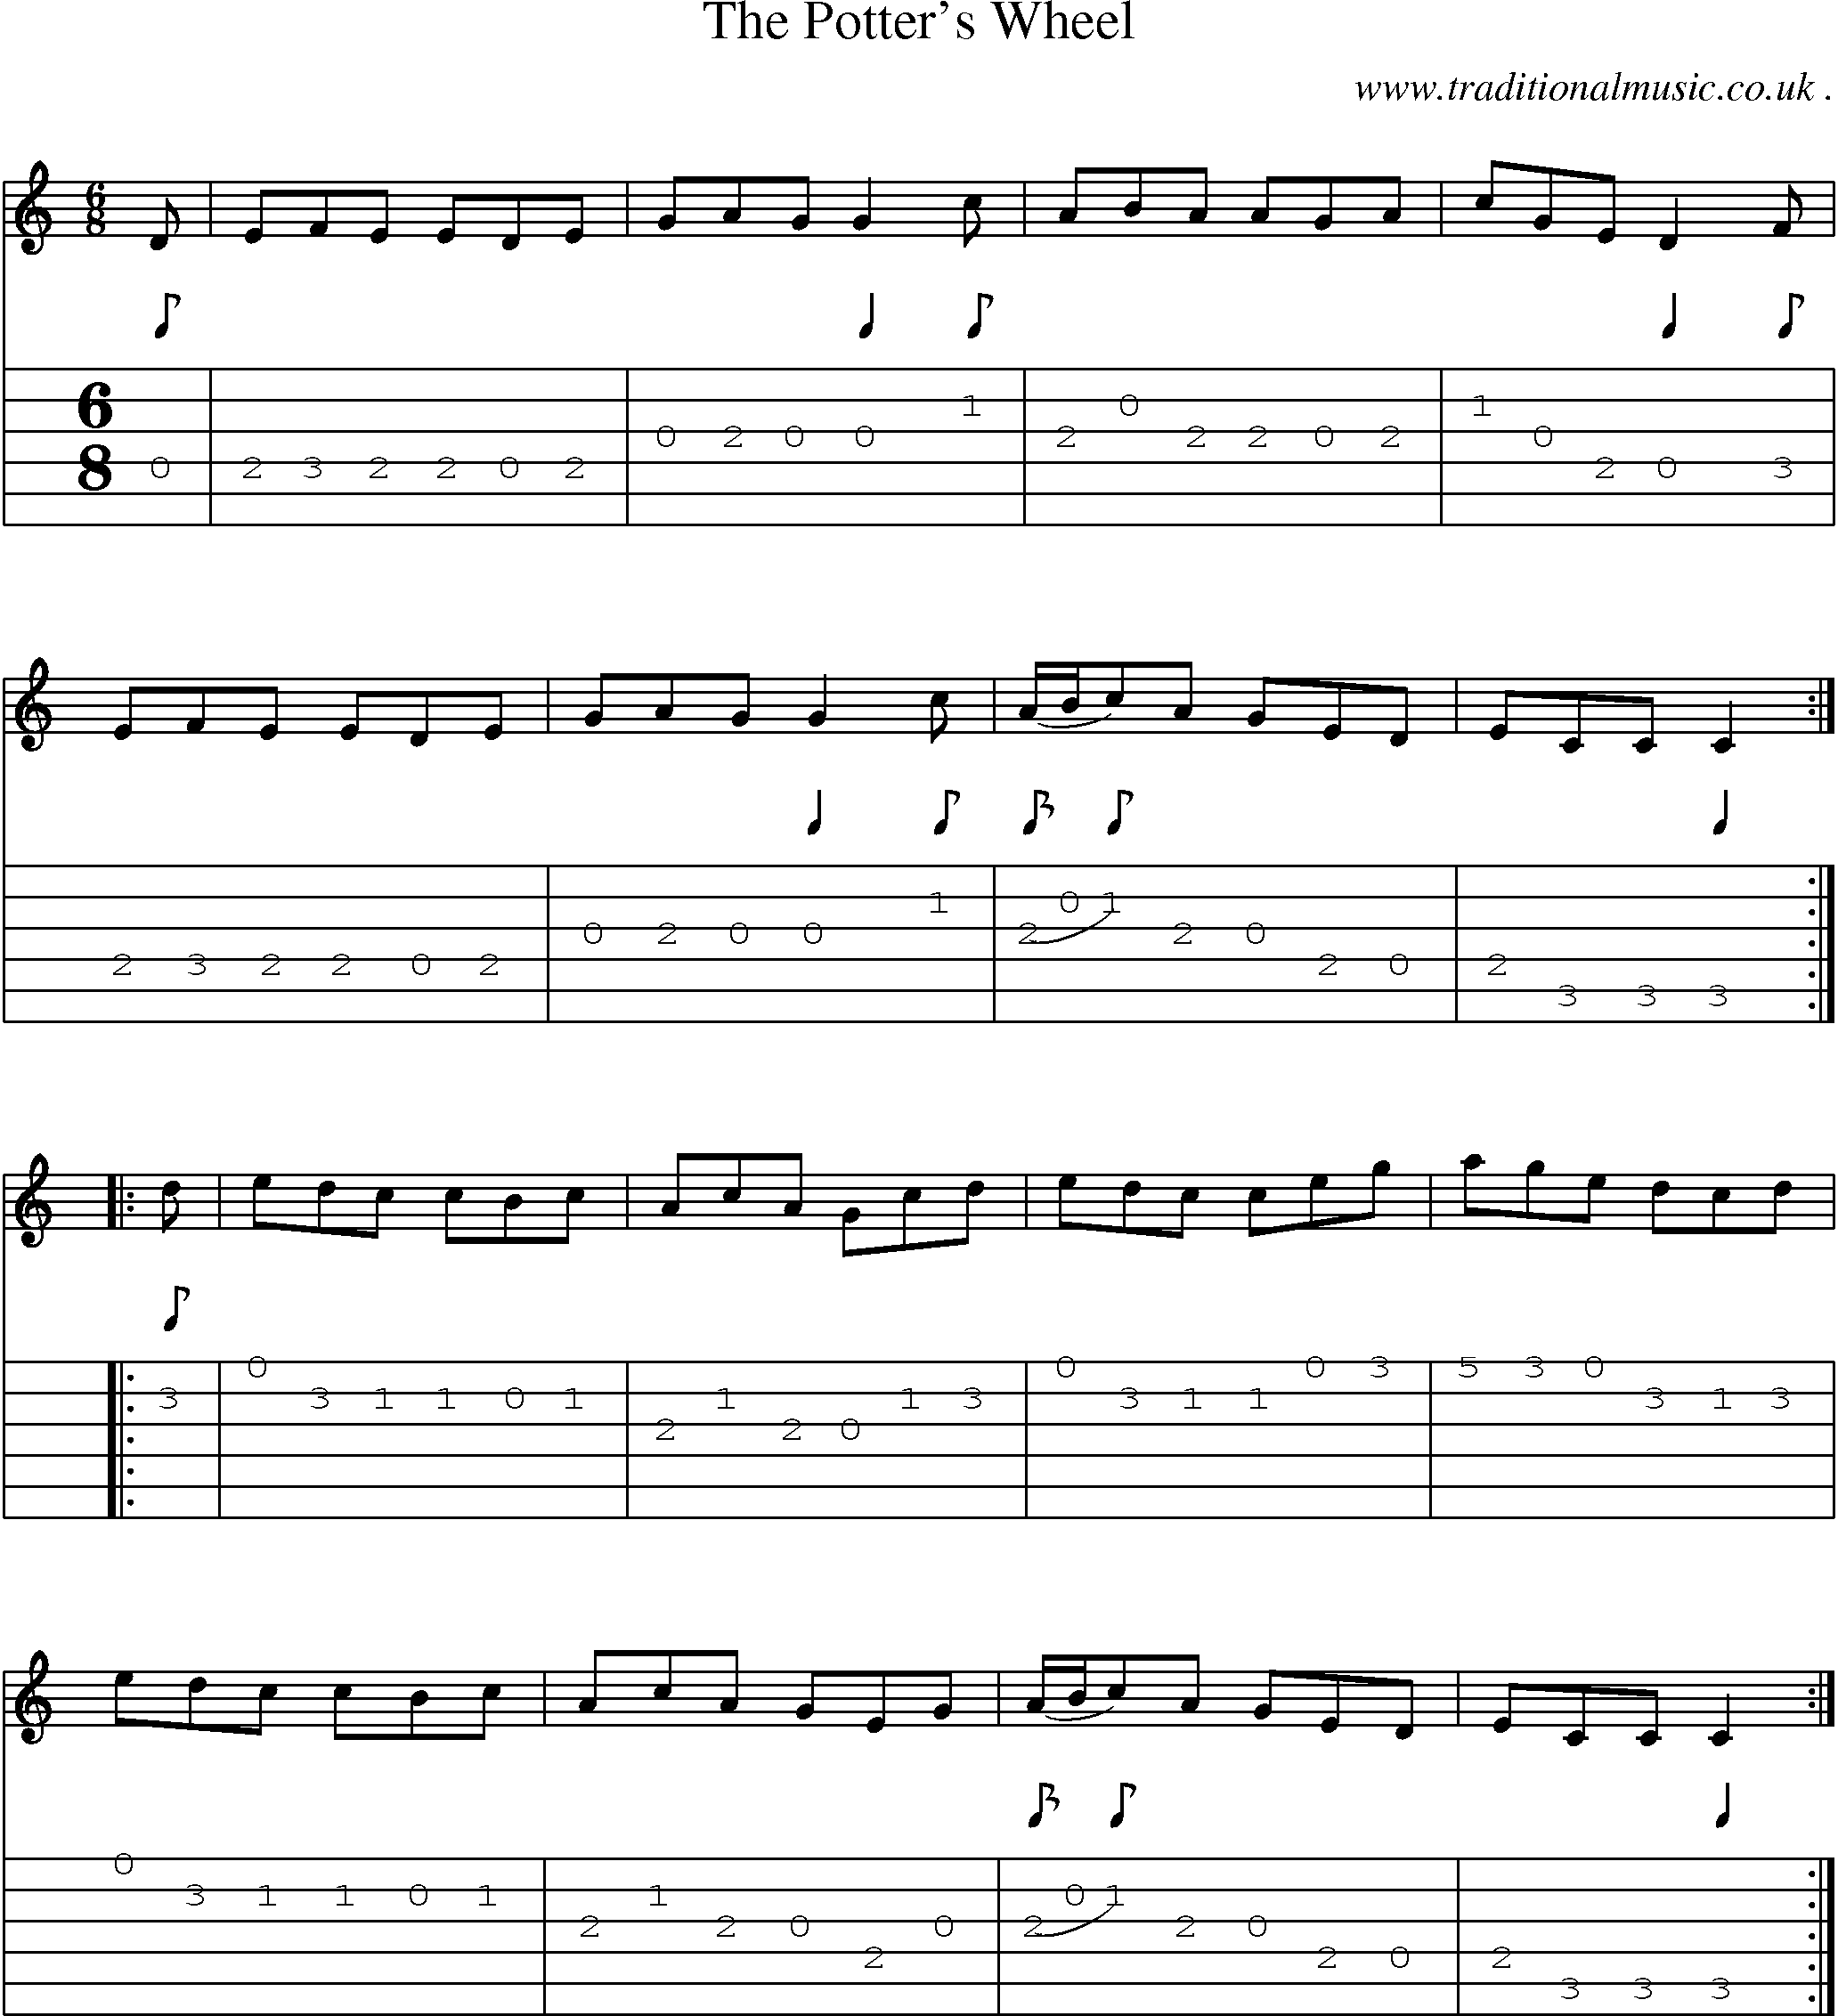 Sheet-Music and Guitar Tabs for The Potters Wheel